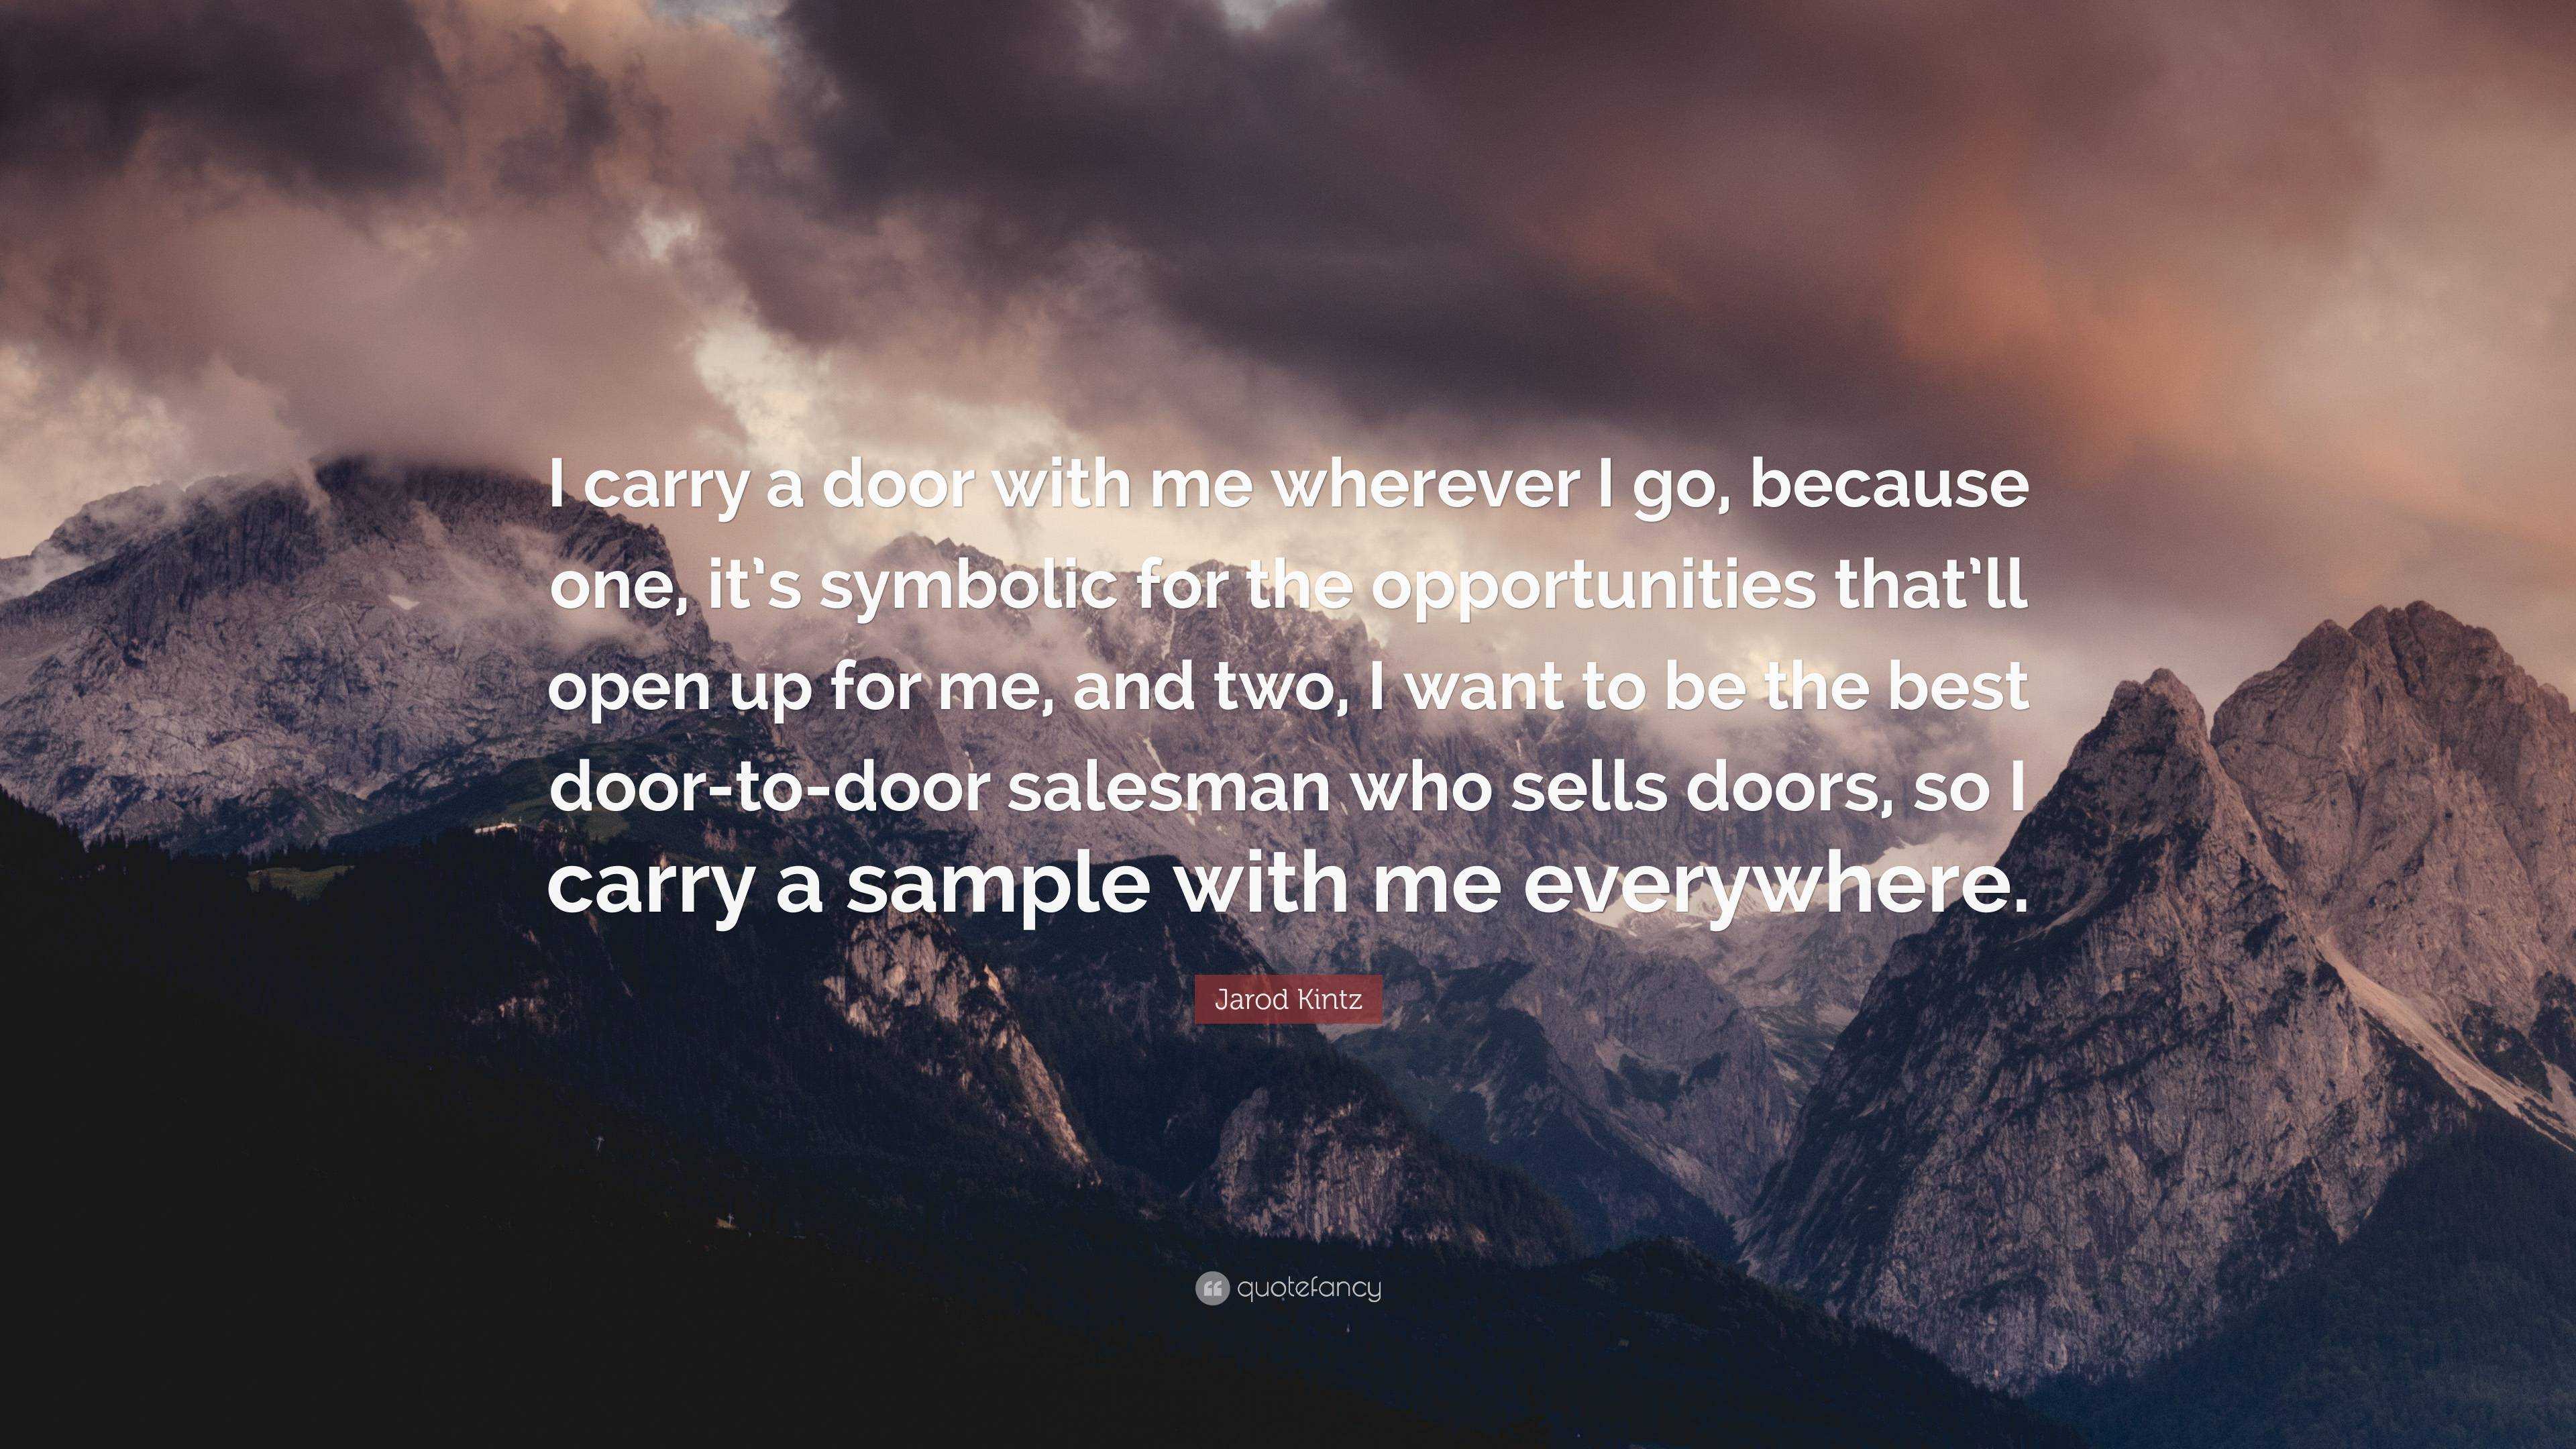 https://quotefancy.com/media/wallpaper/3840x2160/6733379-Jarod-Kintz-Quote-I-carry-a-door-with-me-wherever-I-go-because-one.jpg